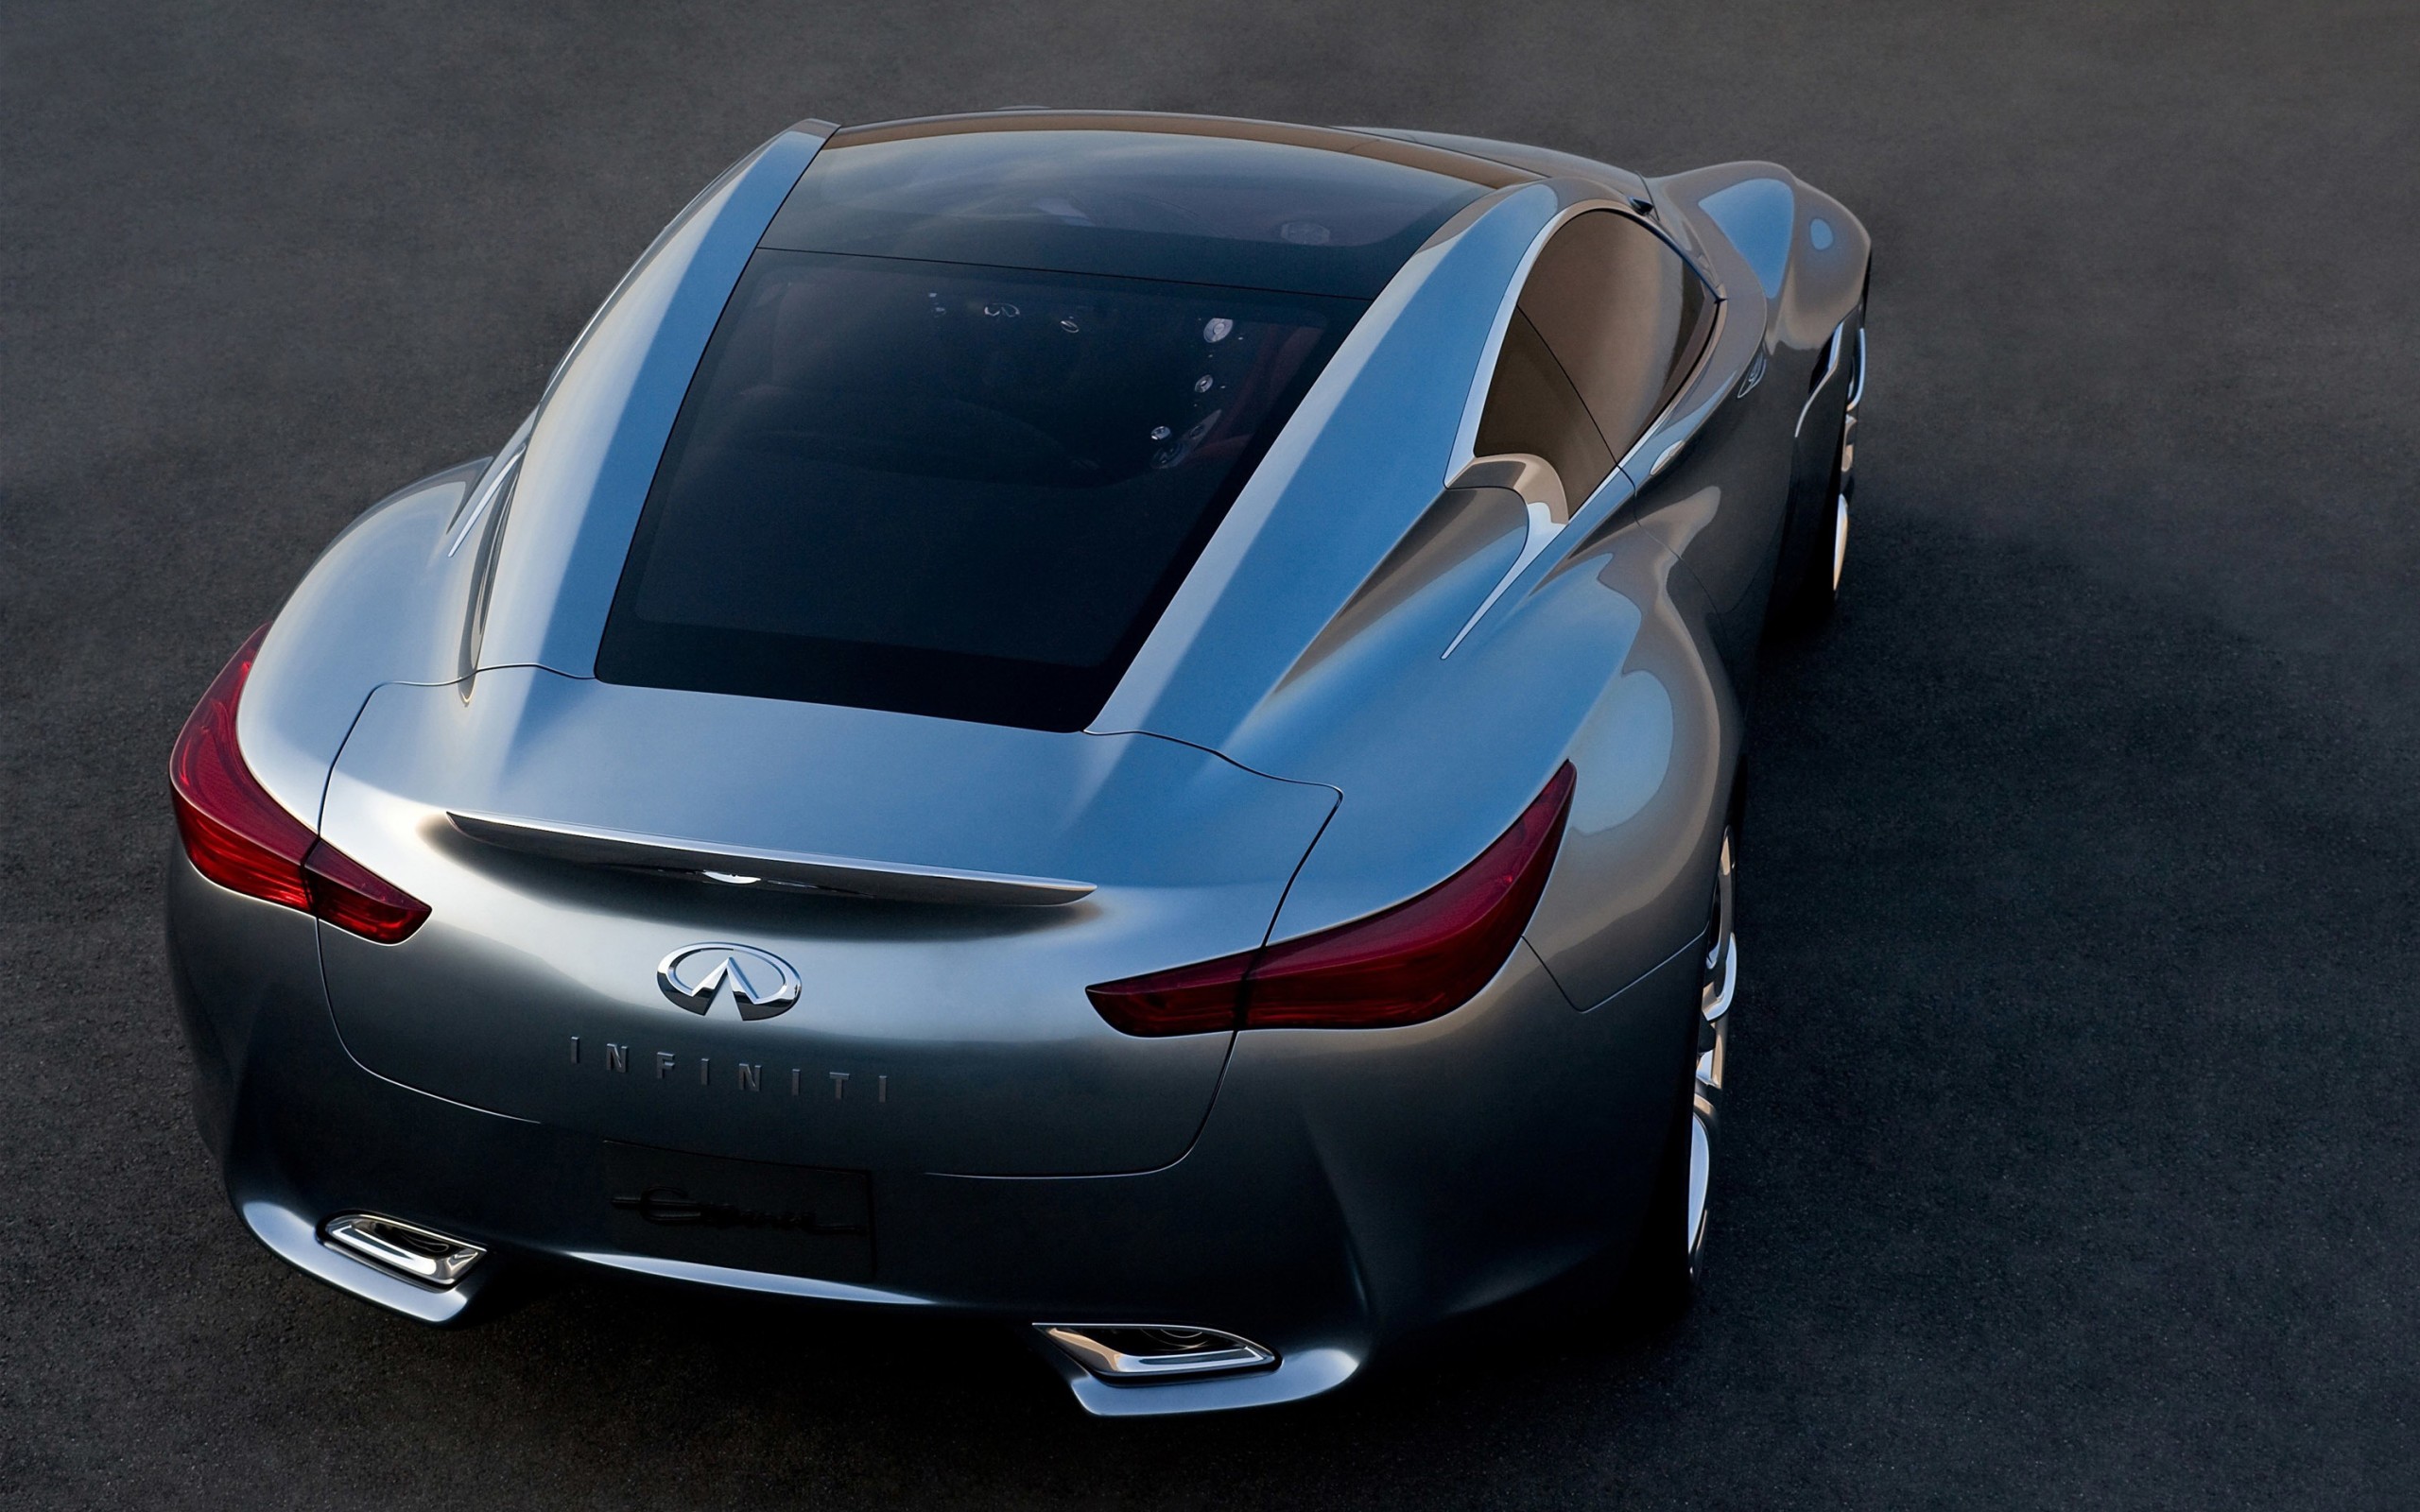 Wallpapers Infiniti sports car coupe on the desktop